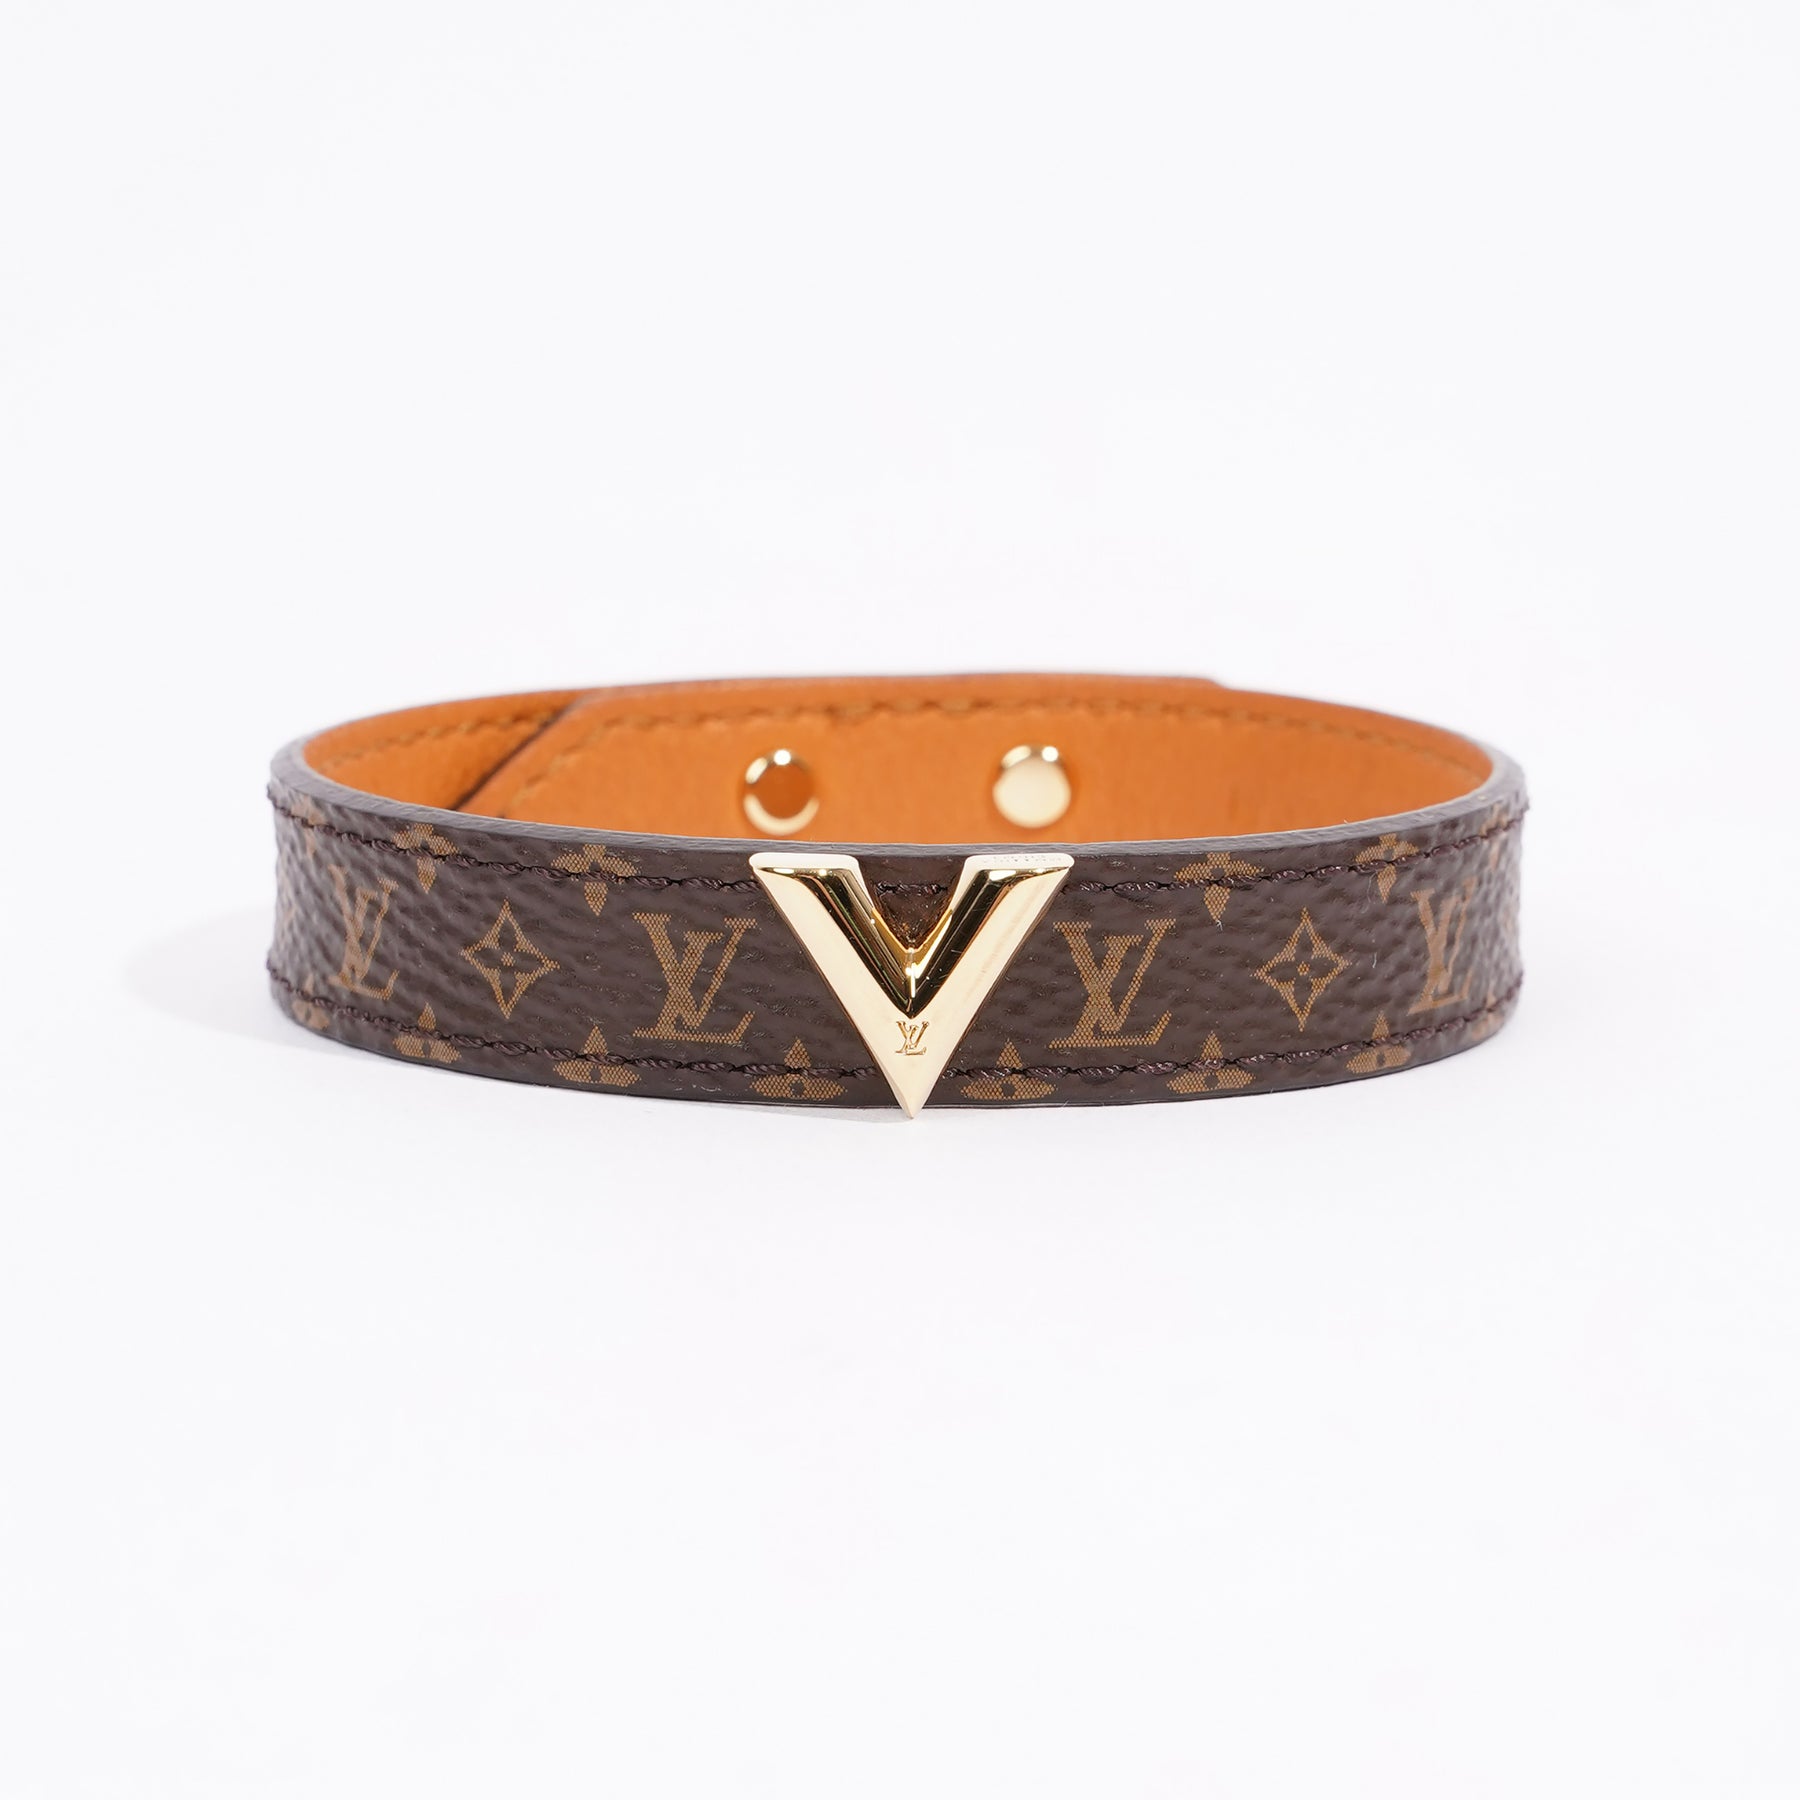 Louis Vuitton Bracelet New womens comes with box and dustbag